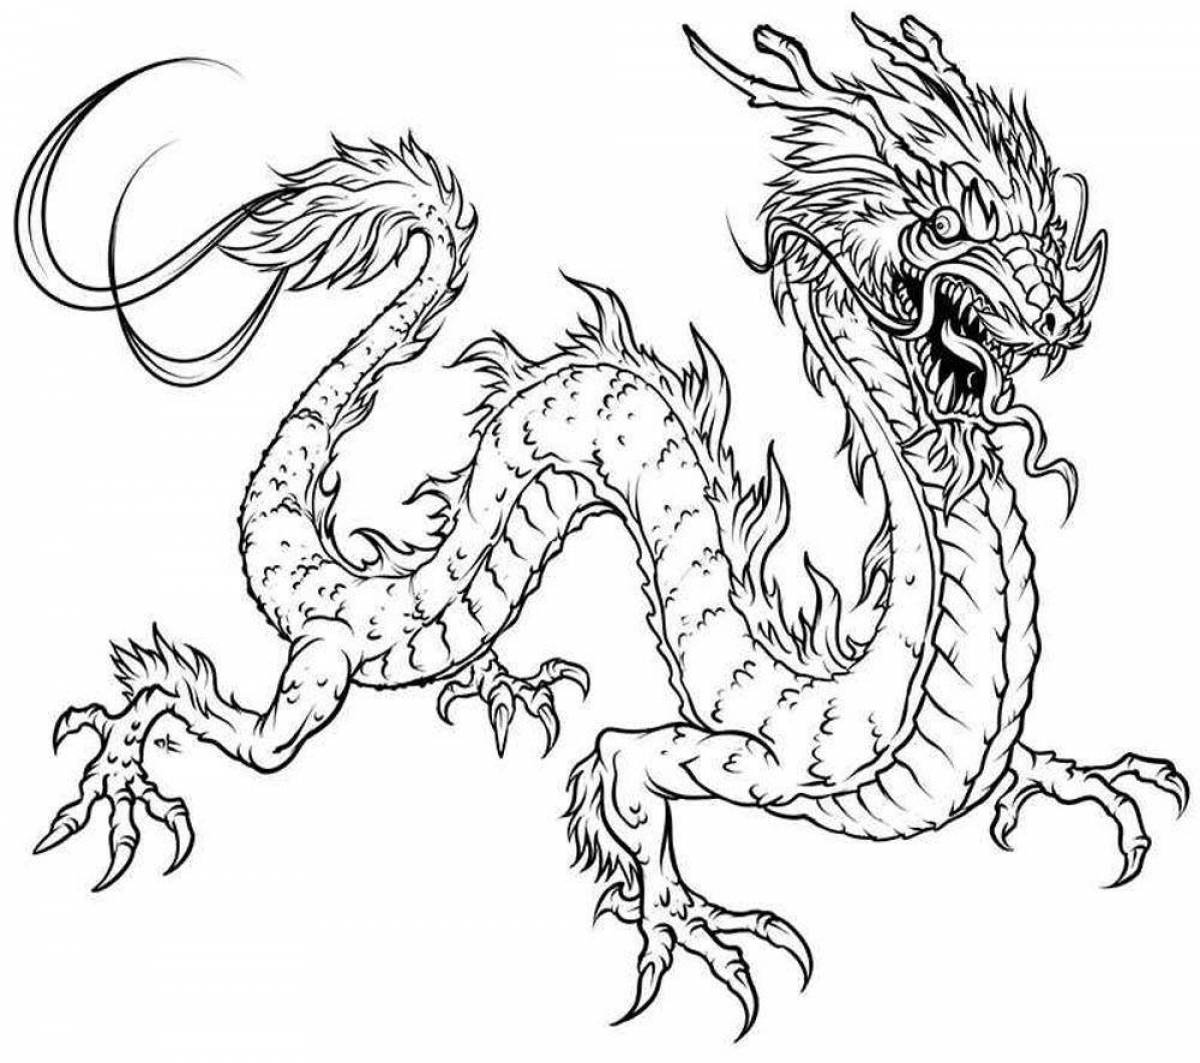 Awesome magic dragon coloring page